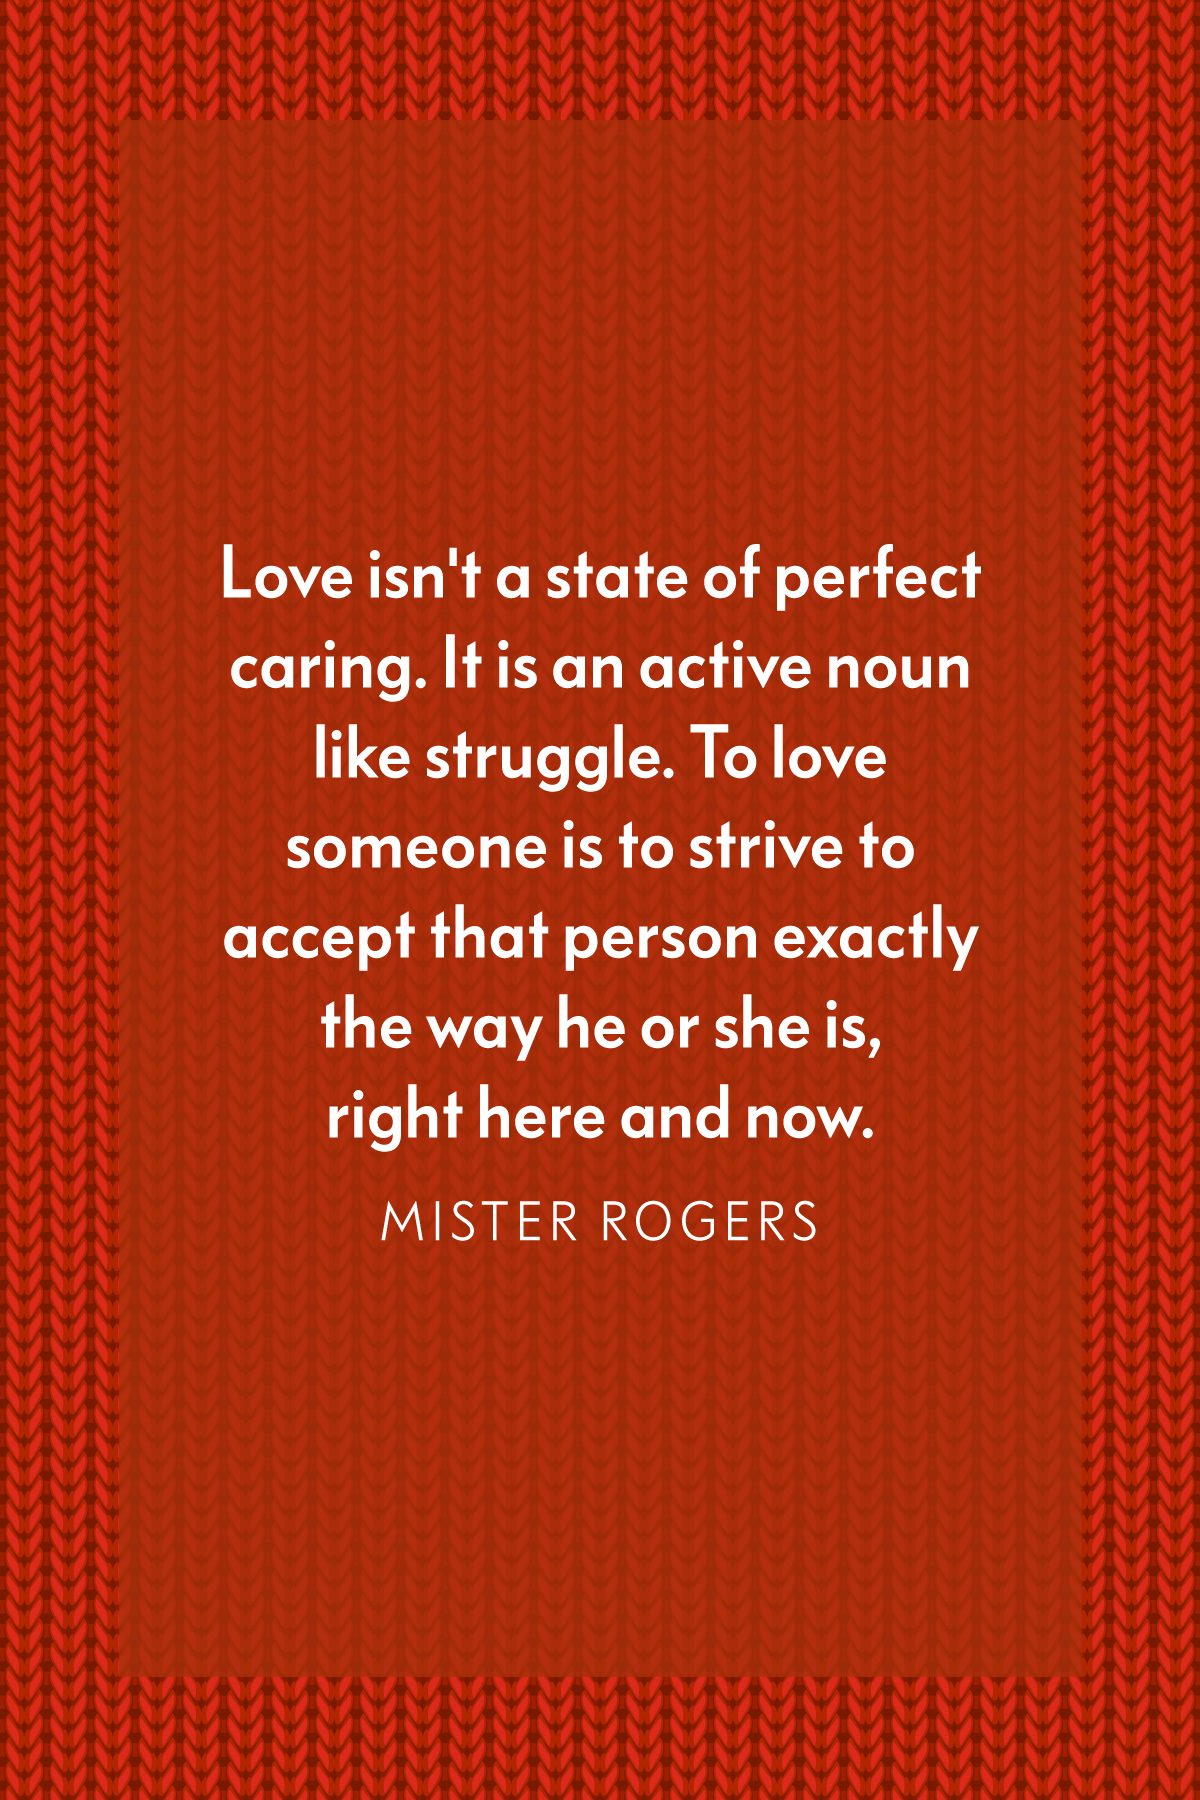 7 Roy Rogers Quotes About Love